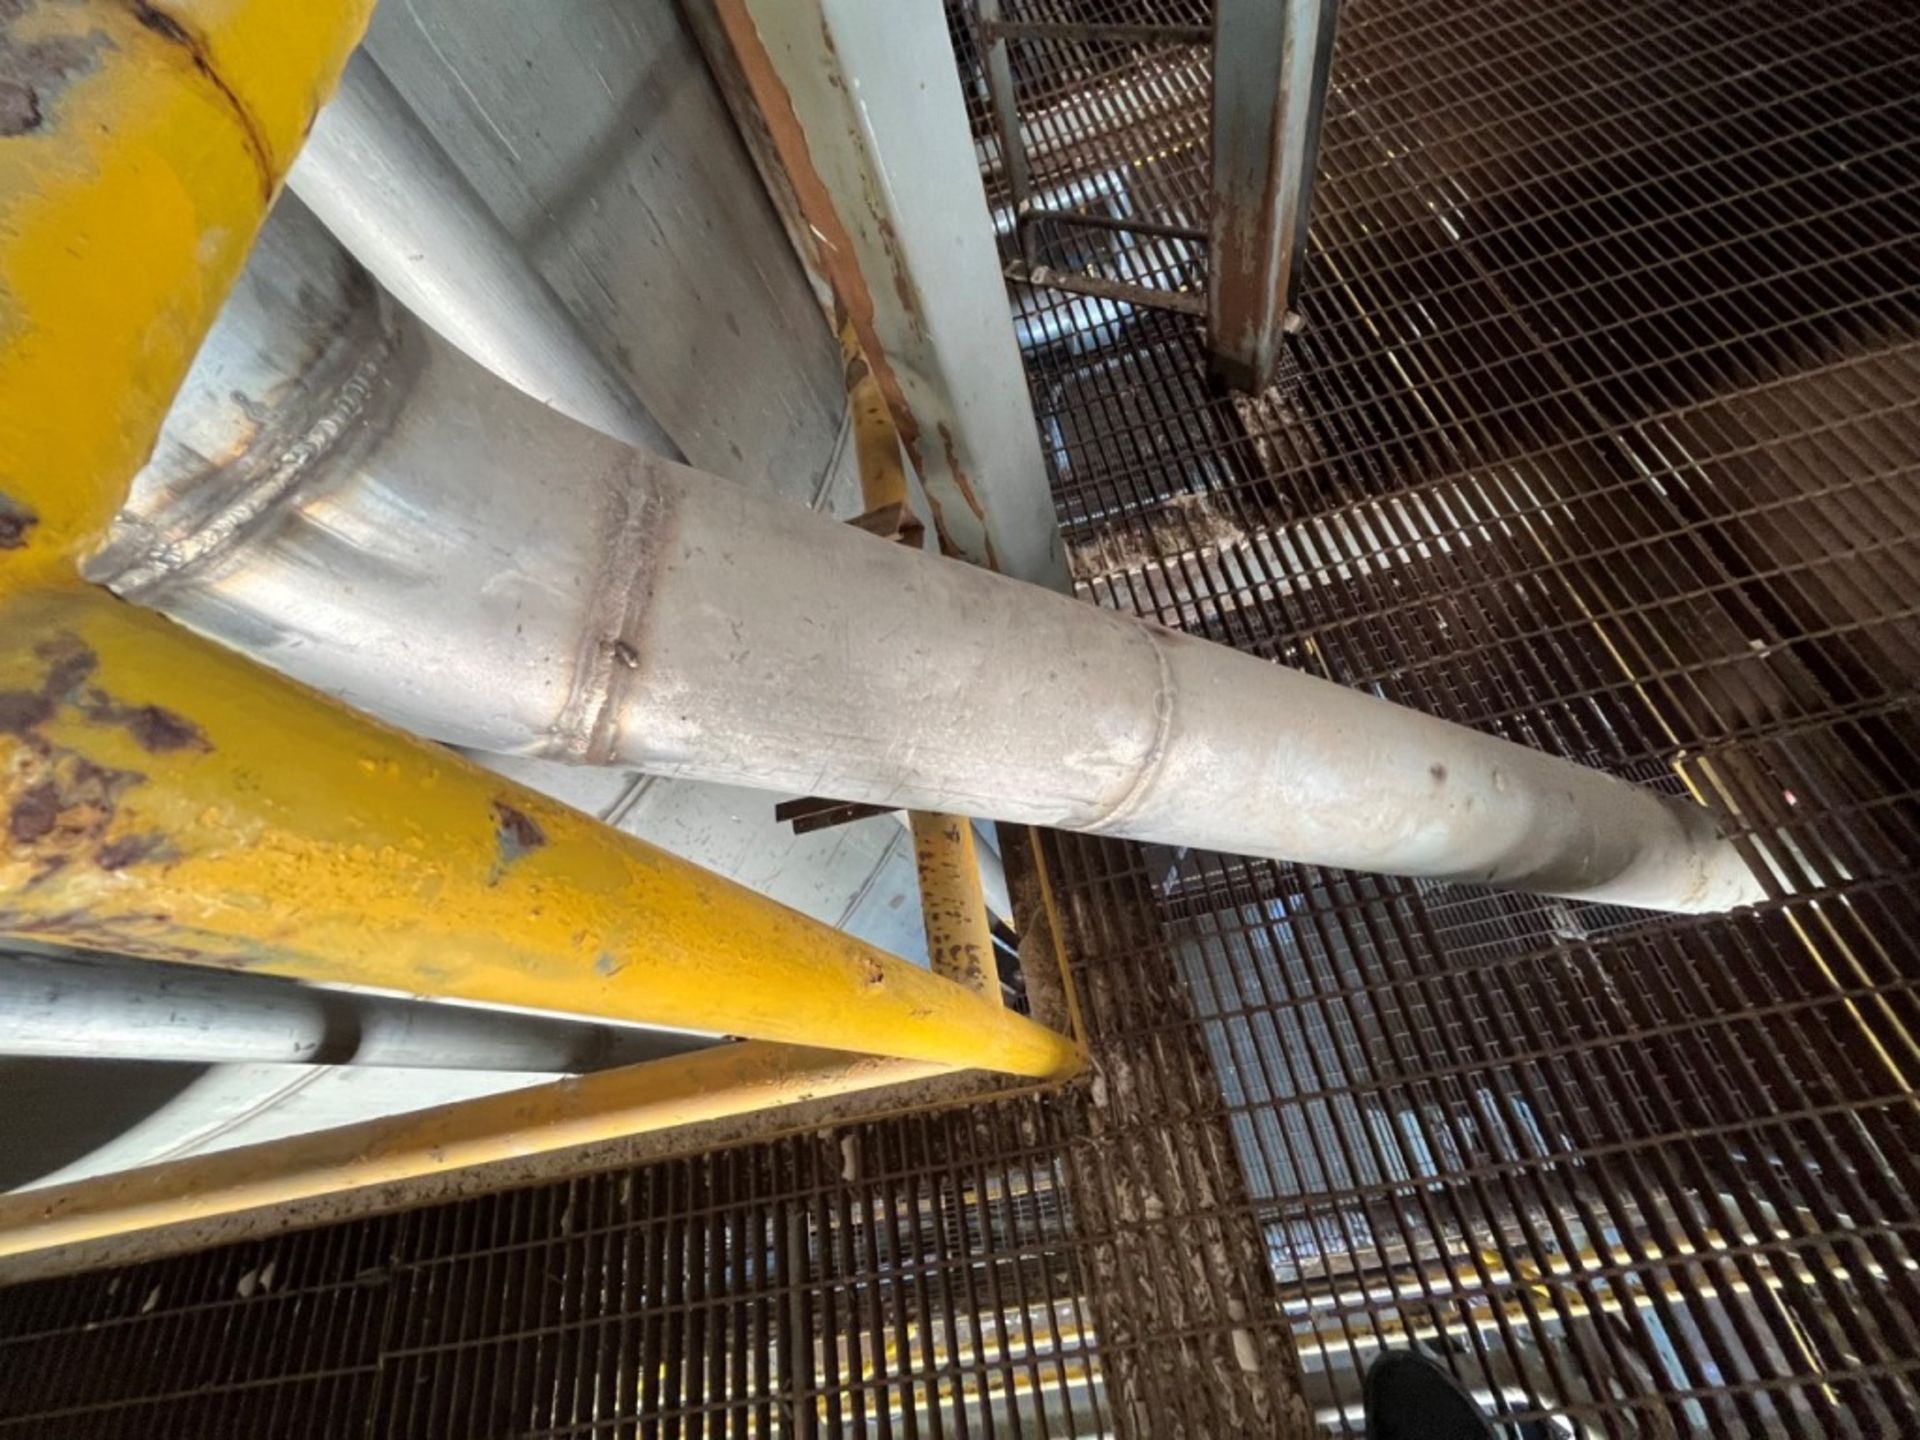 Lot of stainless steel pipe includes: Approximately 100 linear meters of 3 1/2" pipe - Image 39 of 47